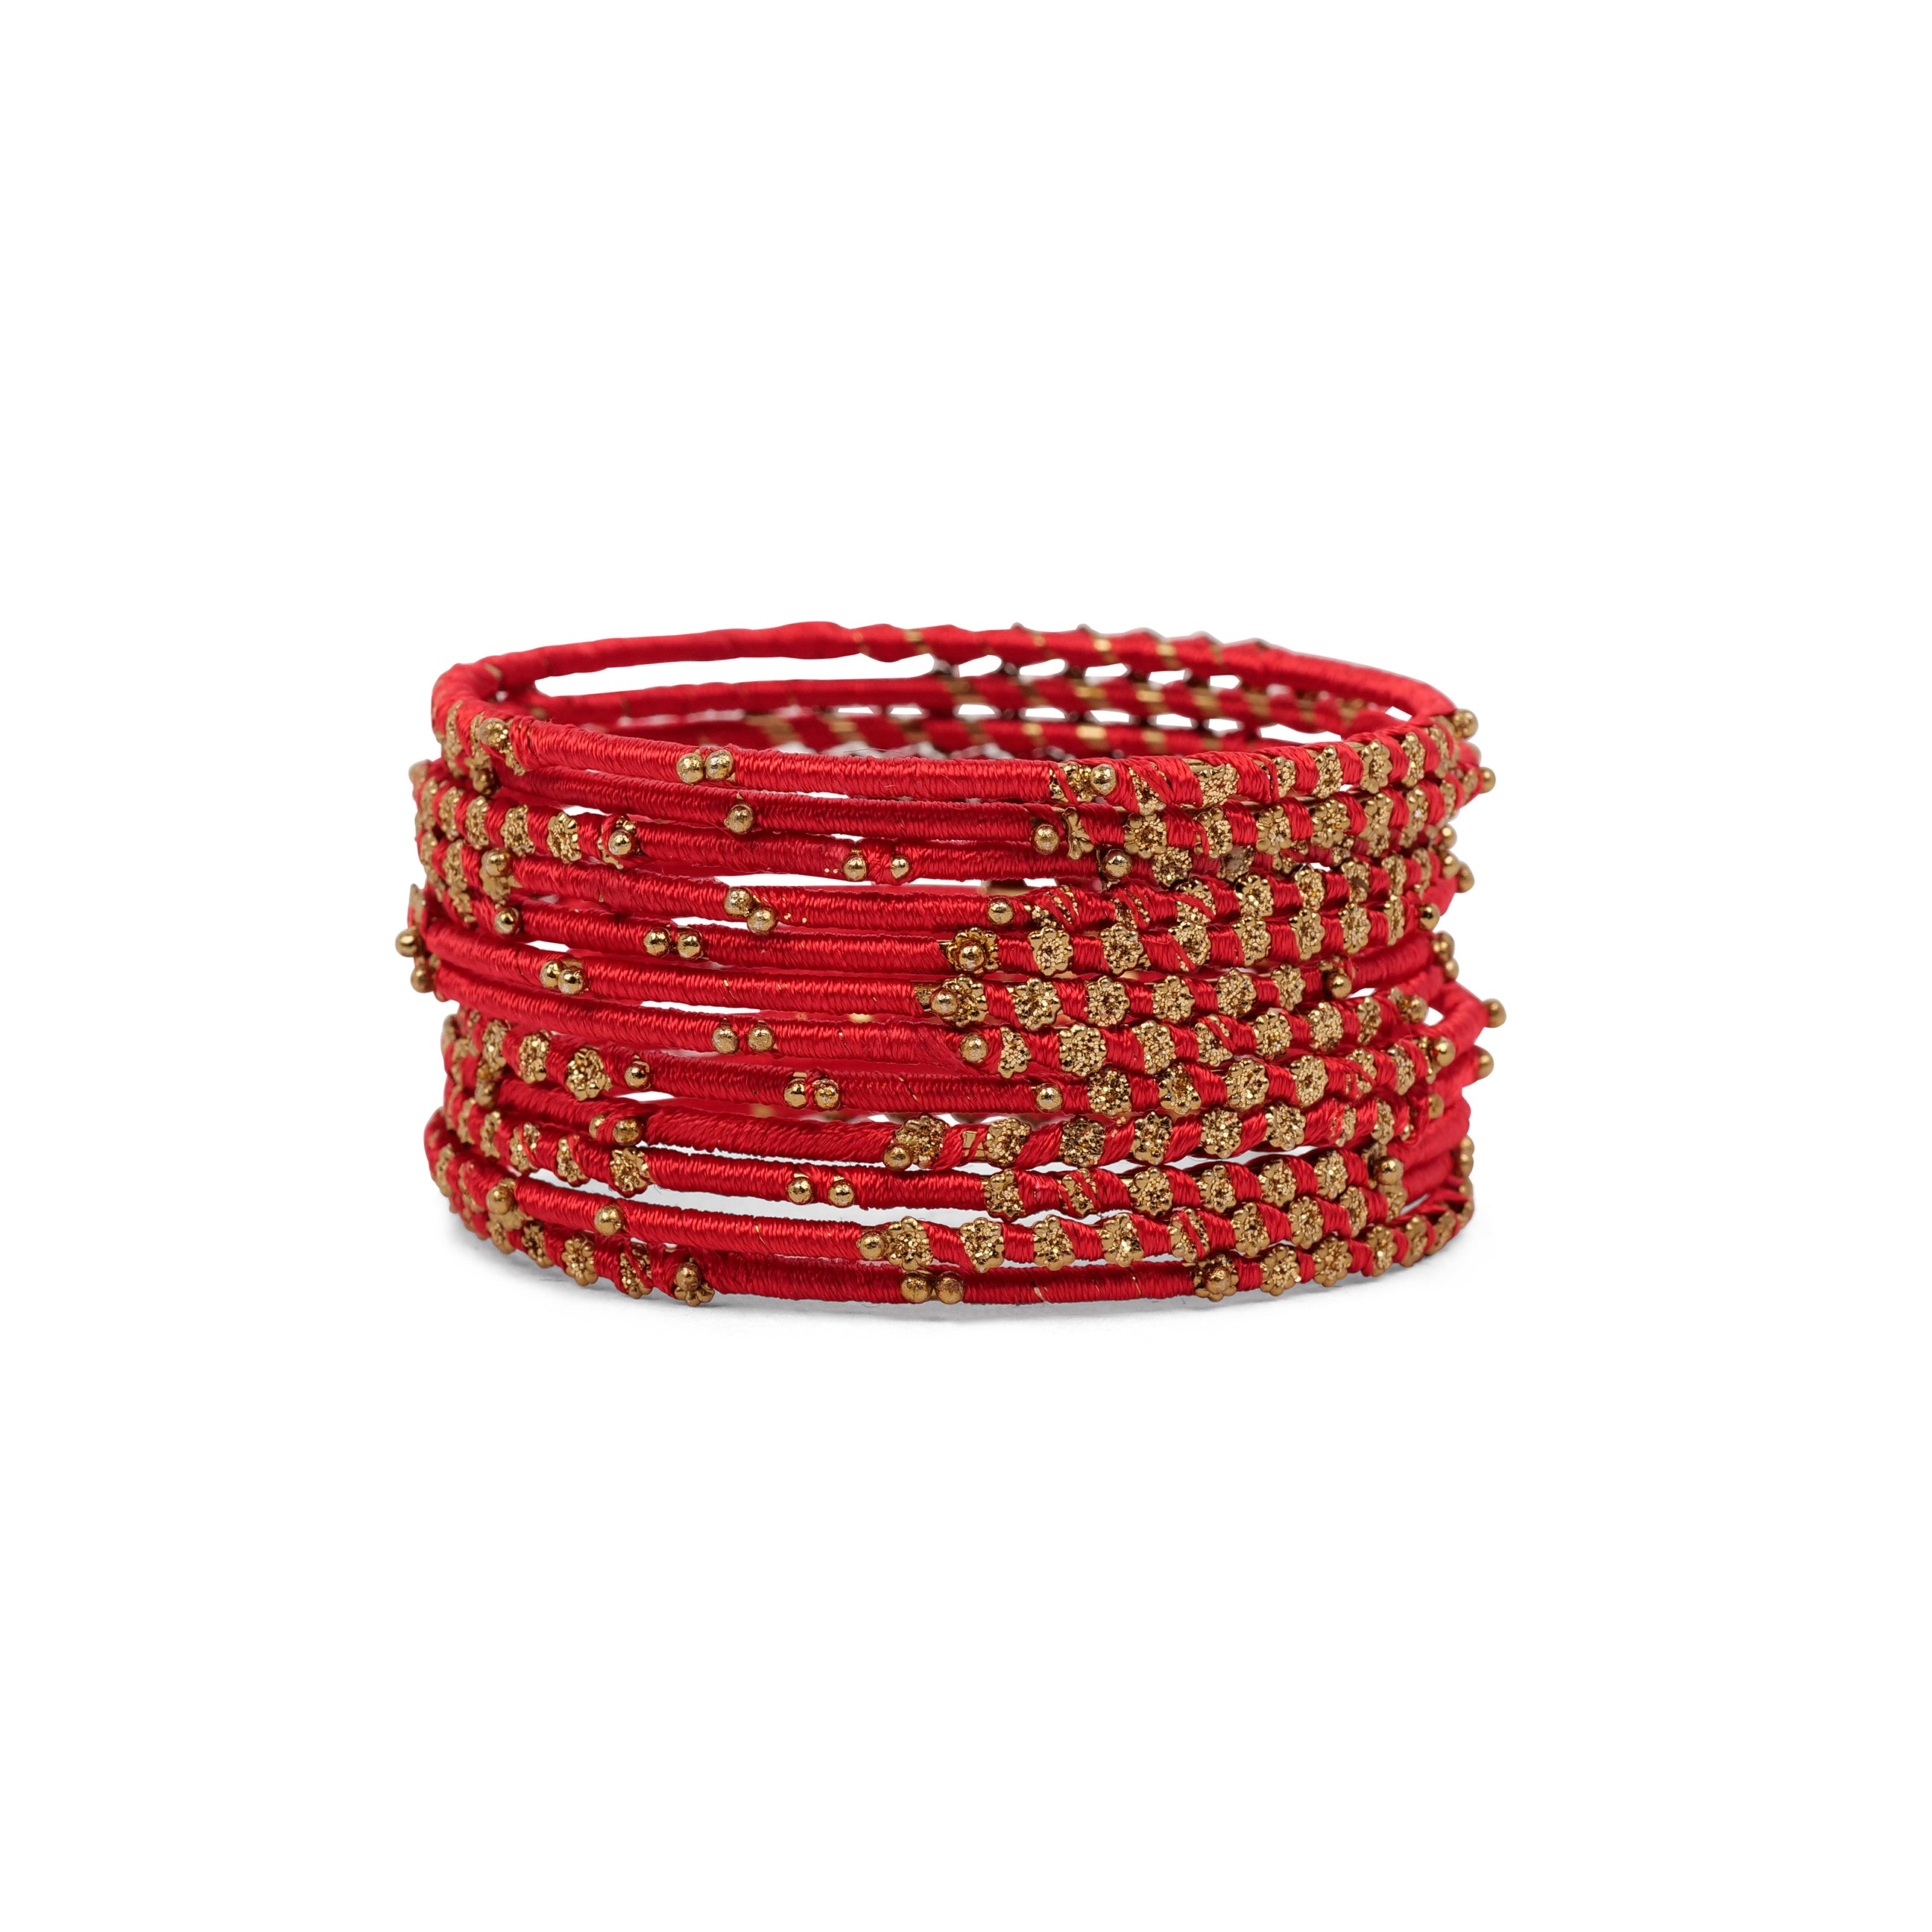 Set of 12 Floral Thread Bangles in Red